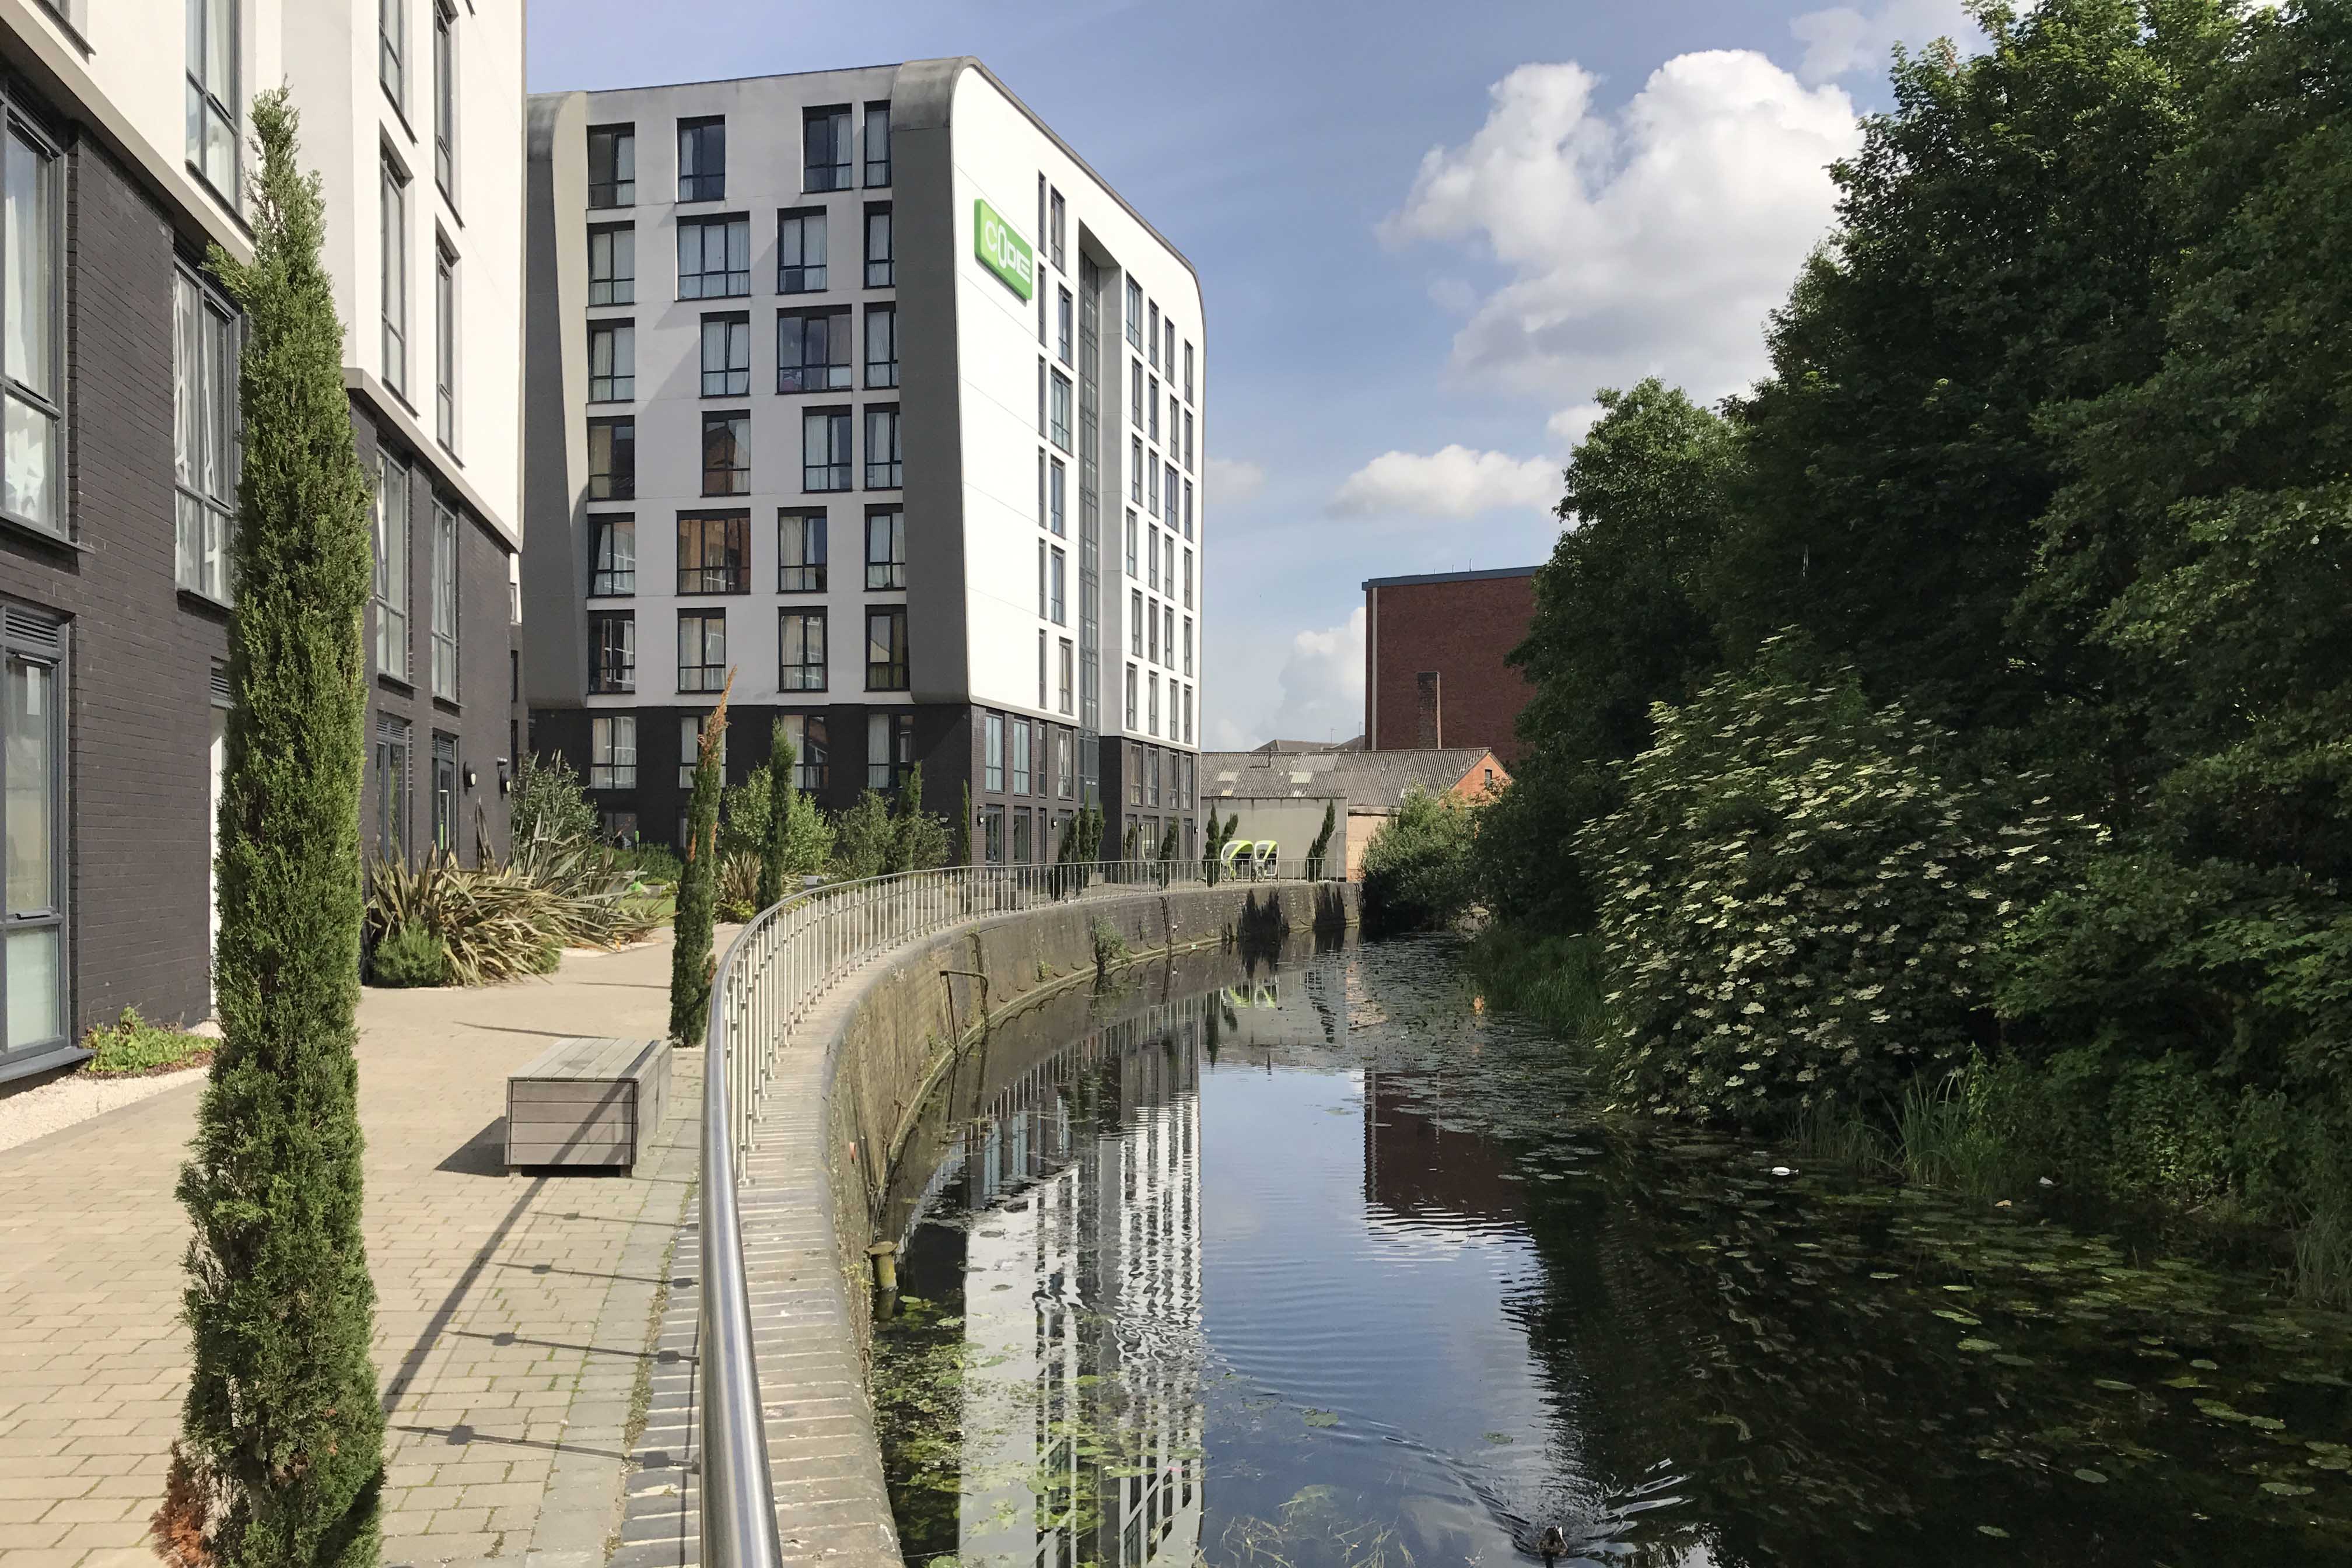 Riverside location CODE Student Accommodation Leicester